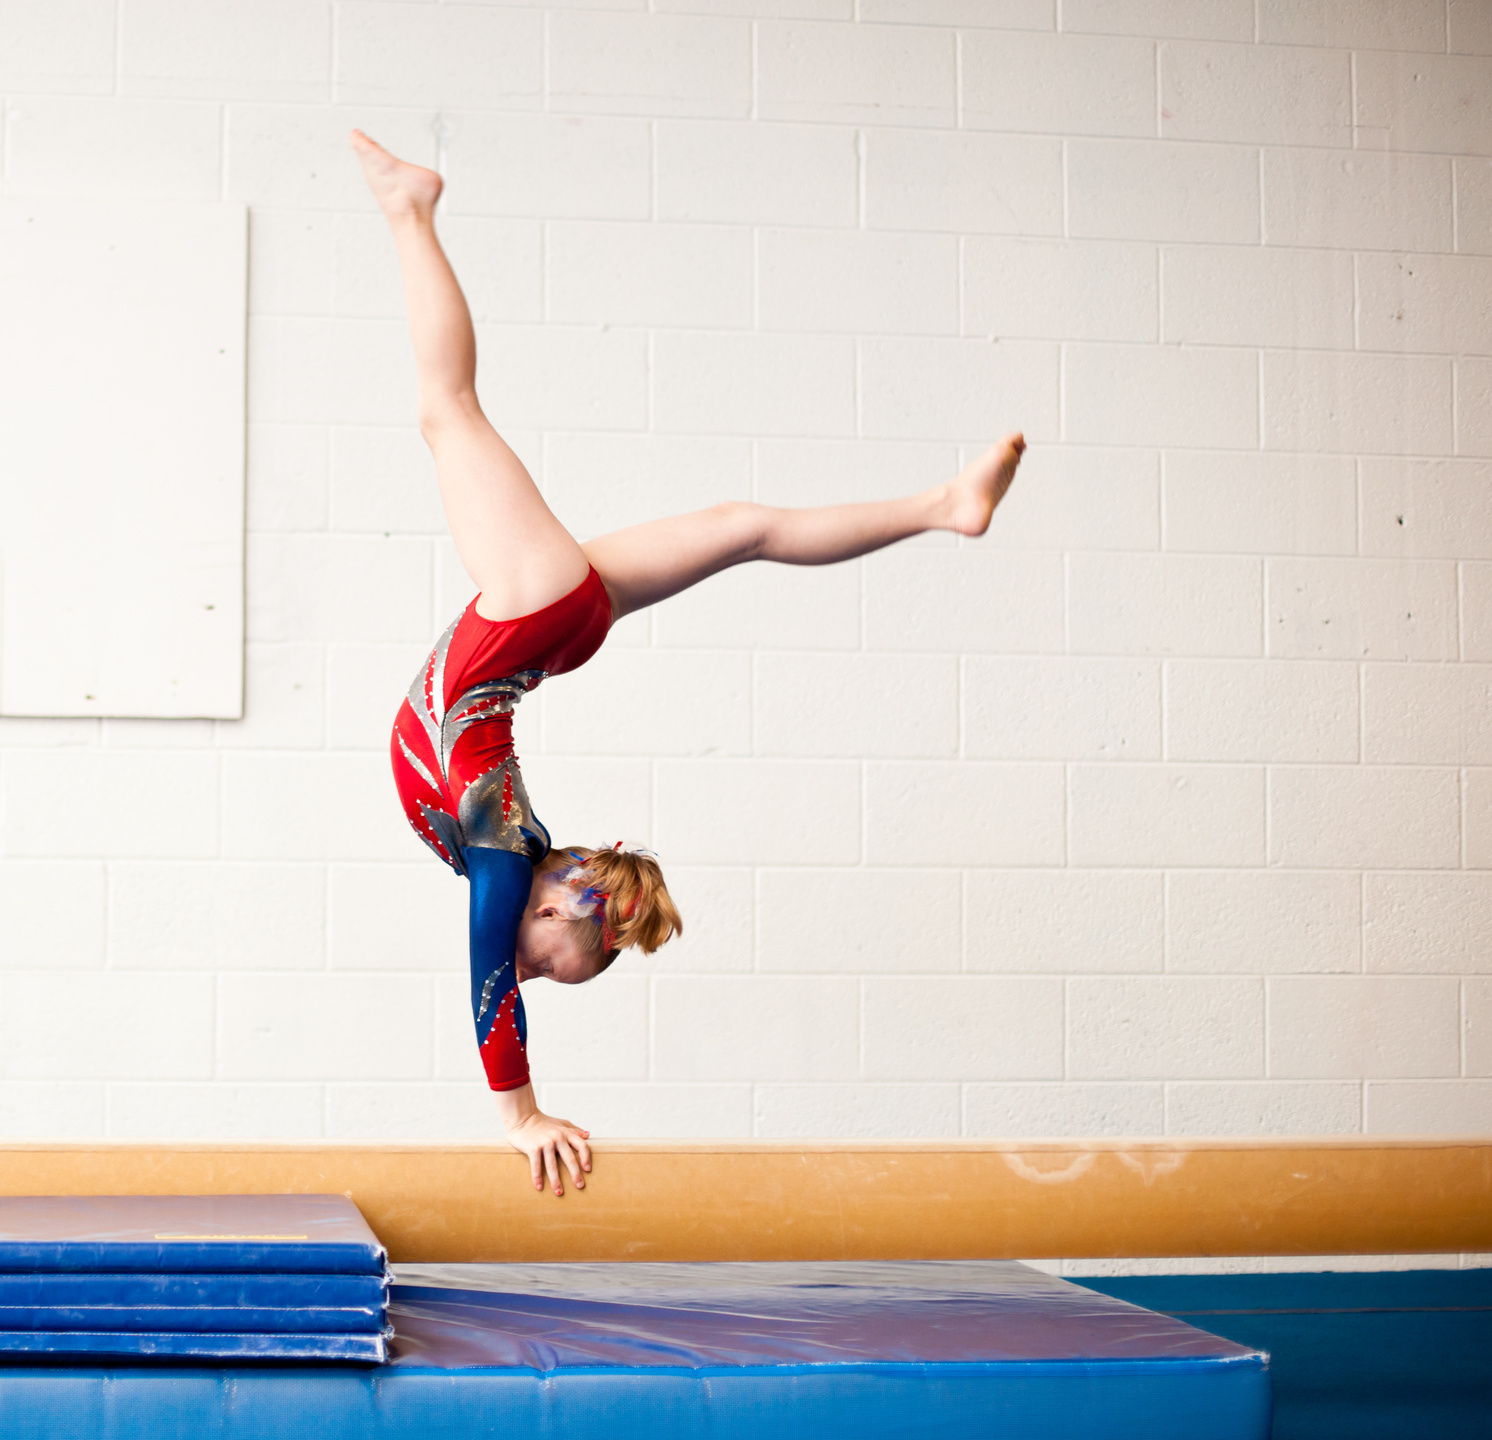 Young Gymnast Performing Walkover on Balance Beam